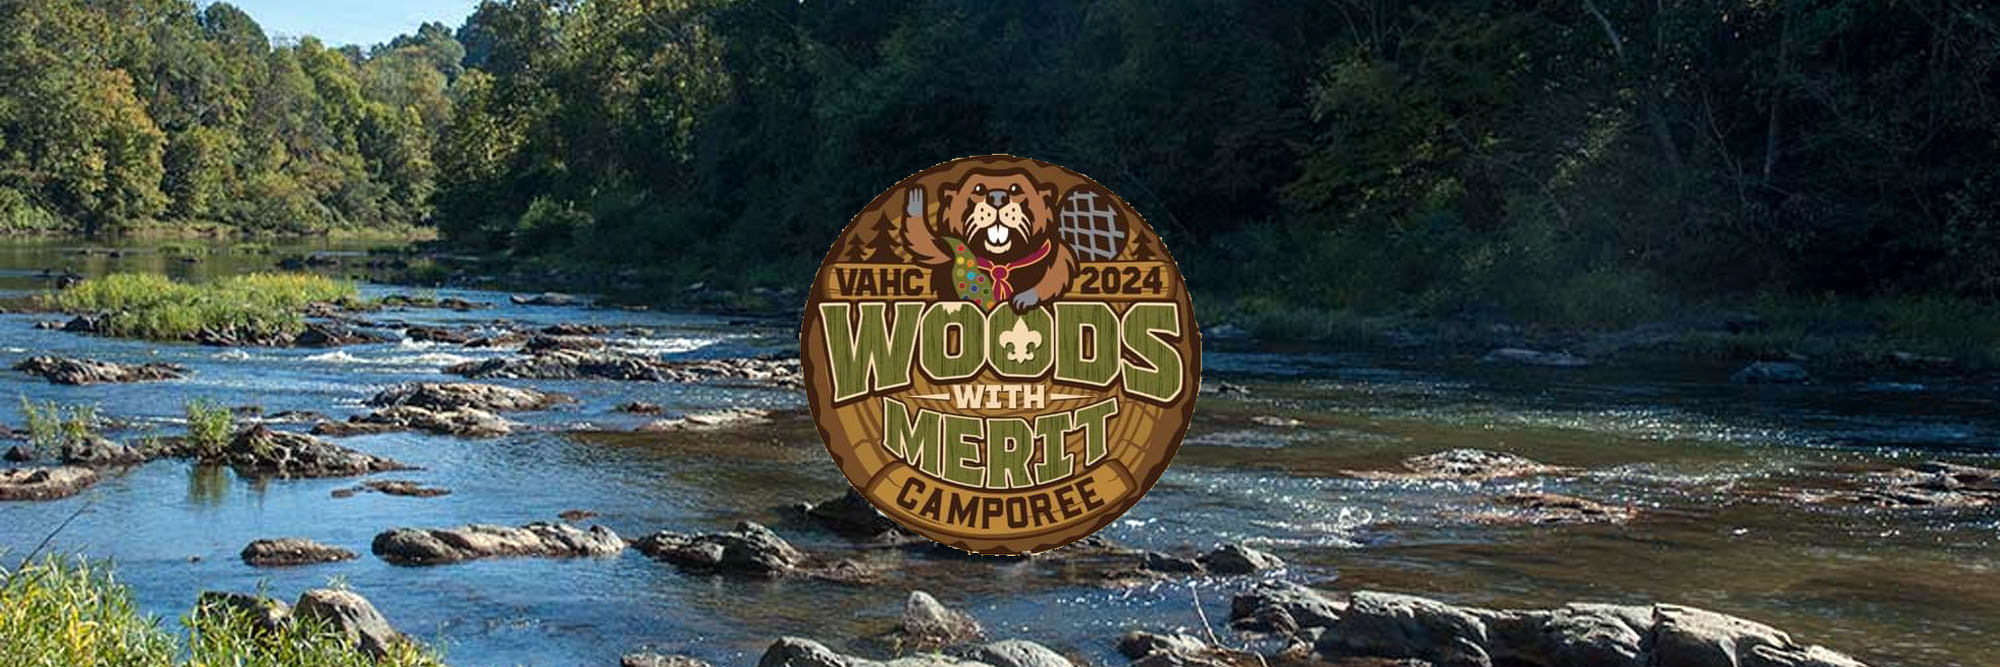 Woods With Merit Camporee logo overlaying a photo of the Rivanna River